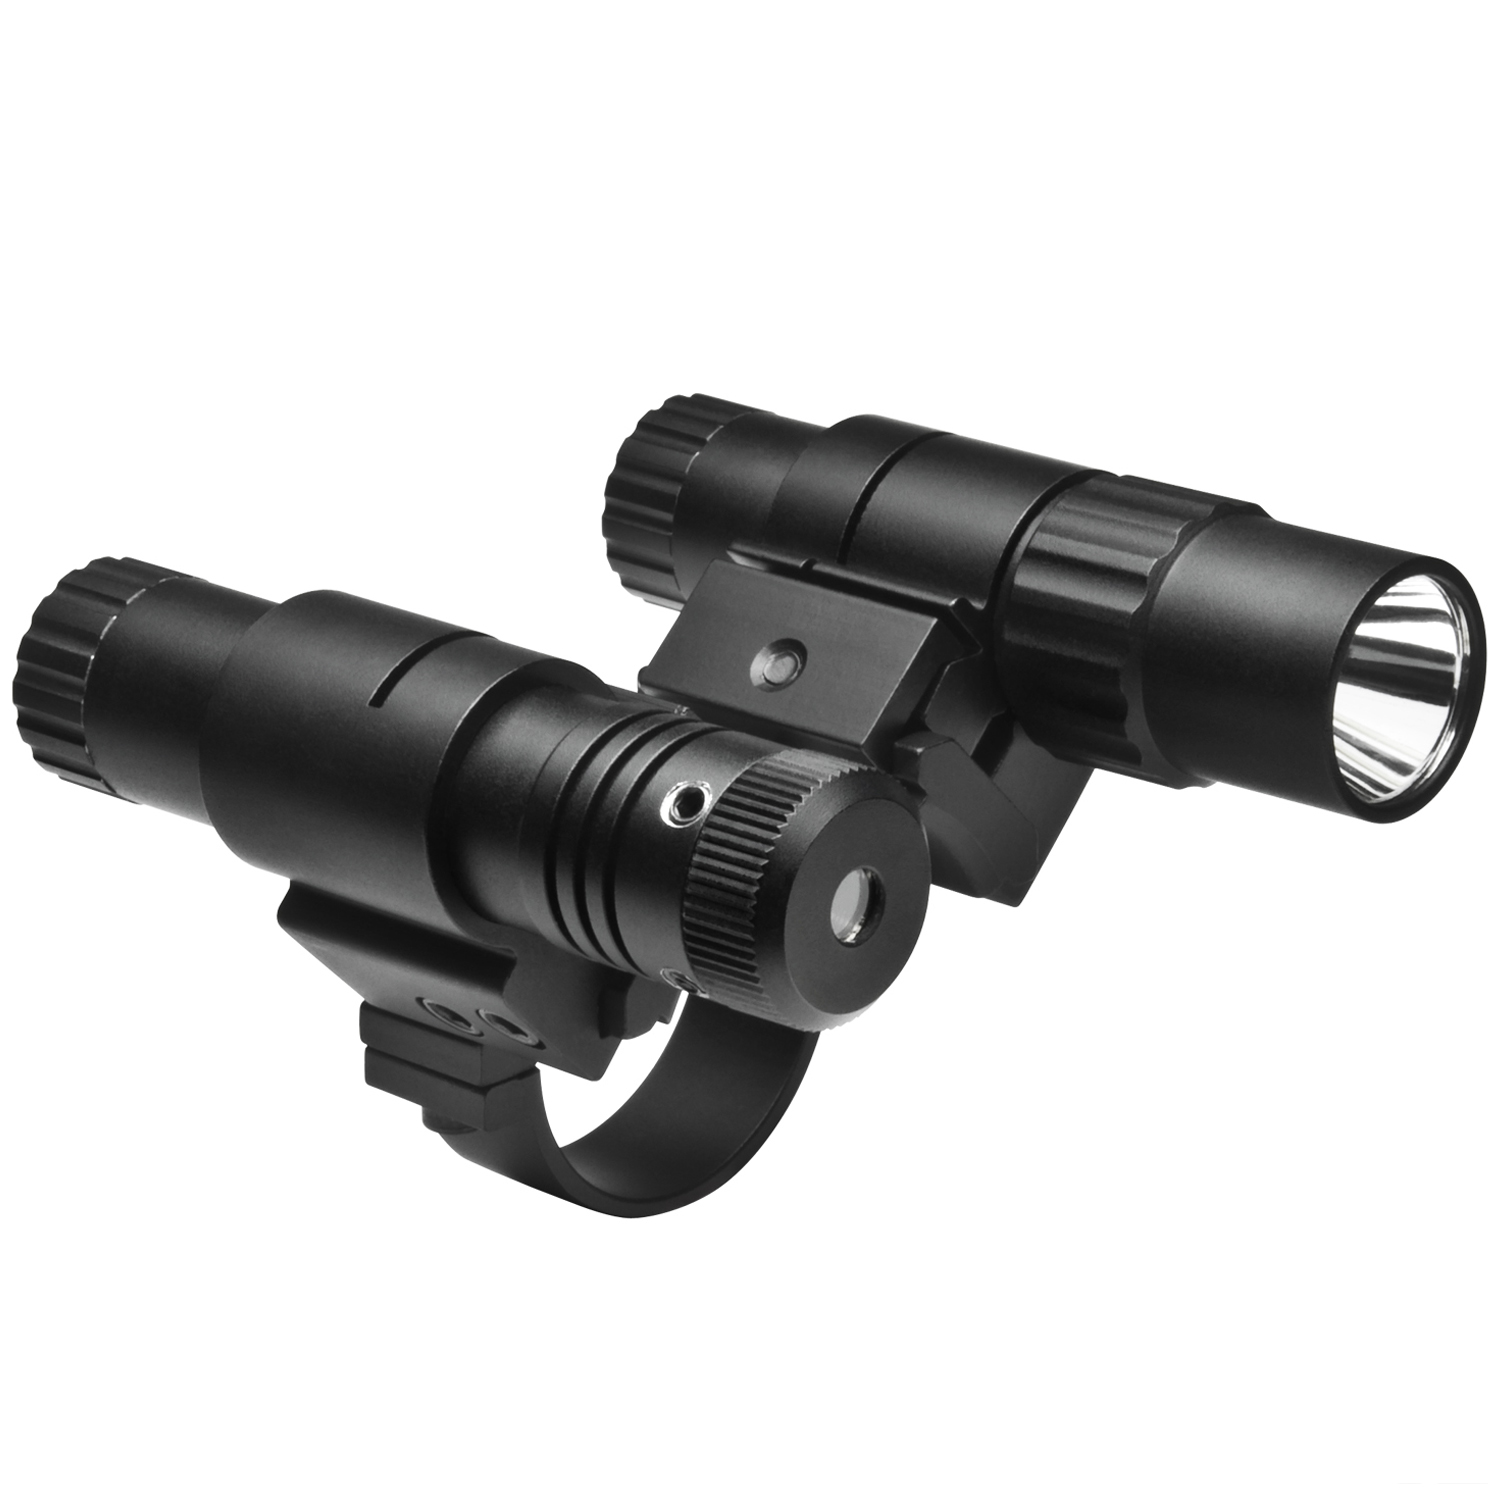 Ncstar Double Rail Scope Adapter And Flashlight With Green Laser Set